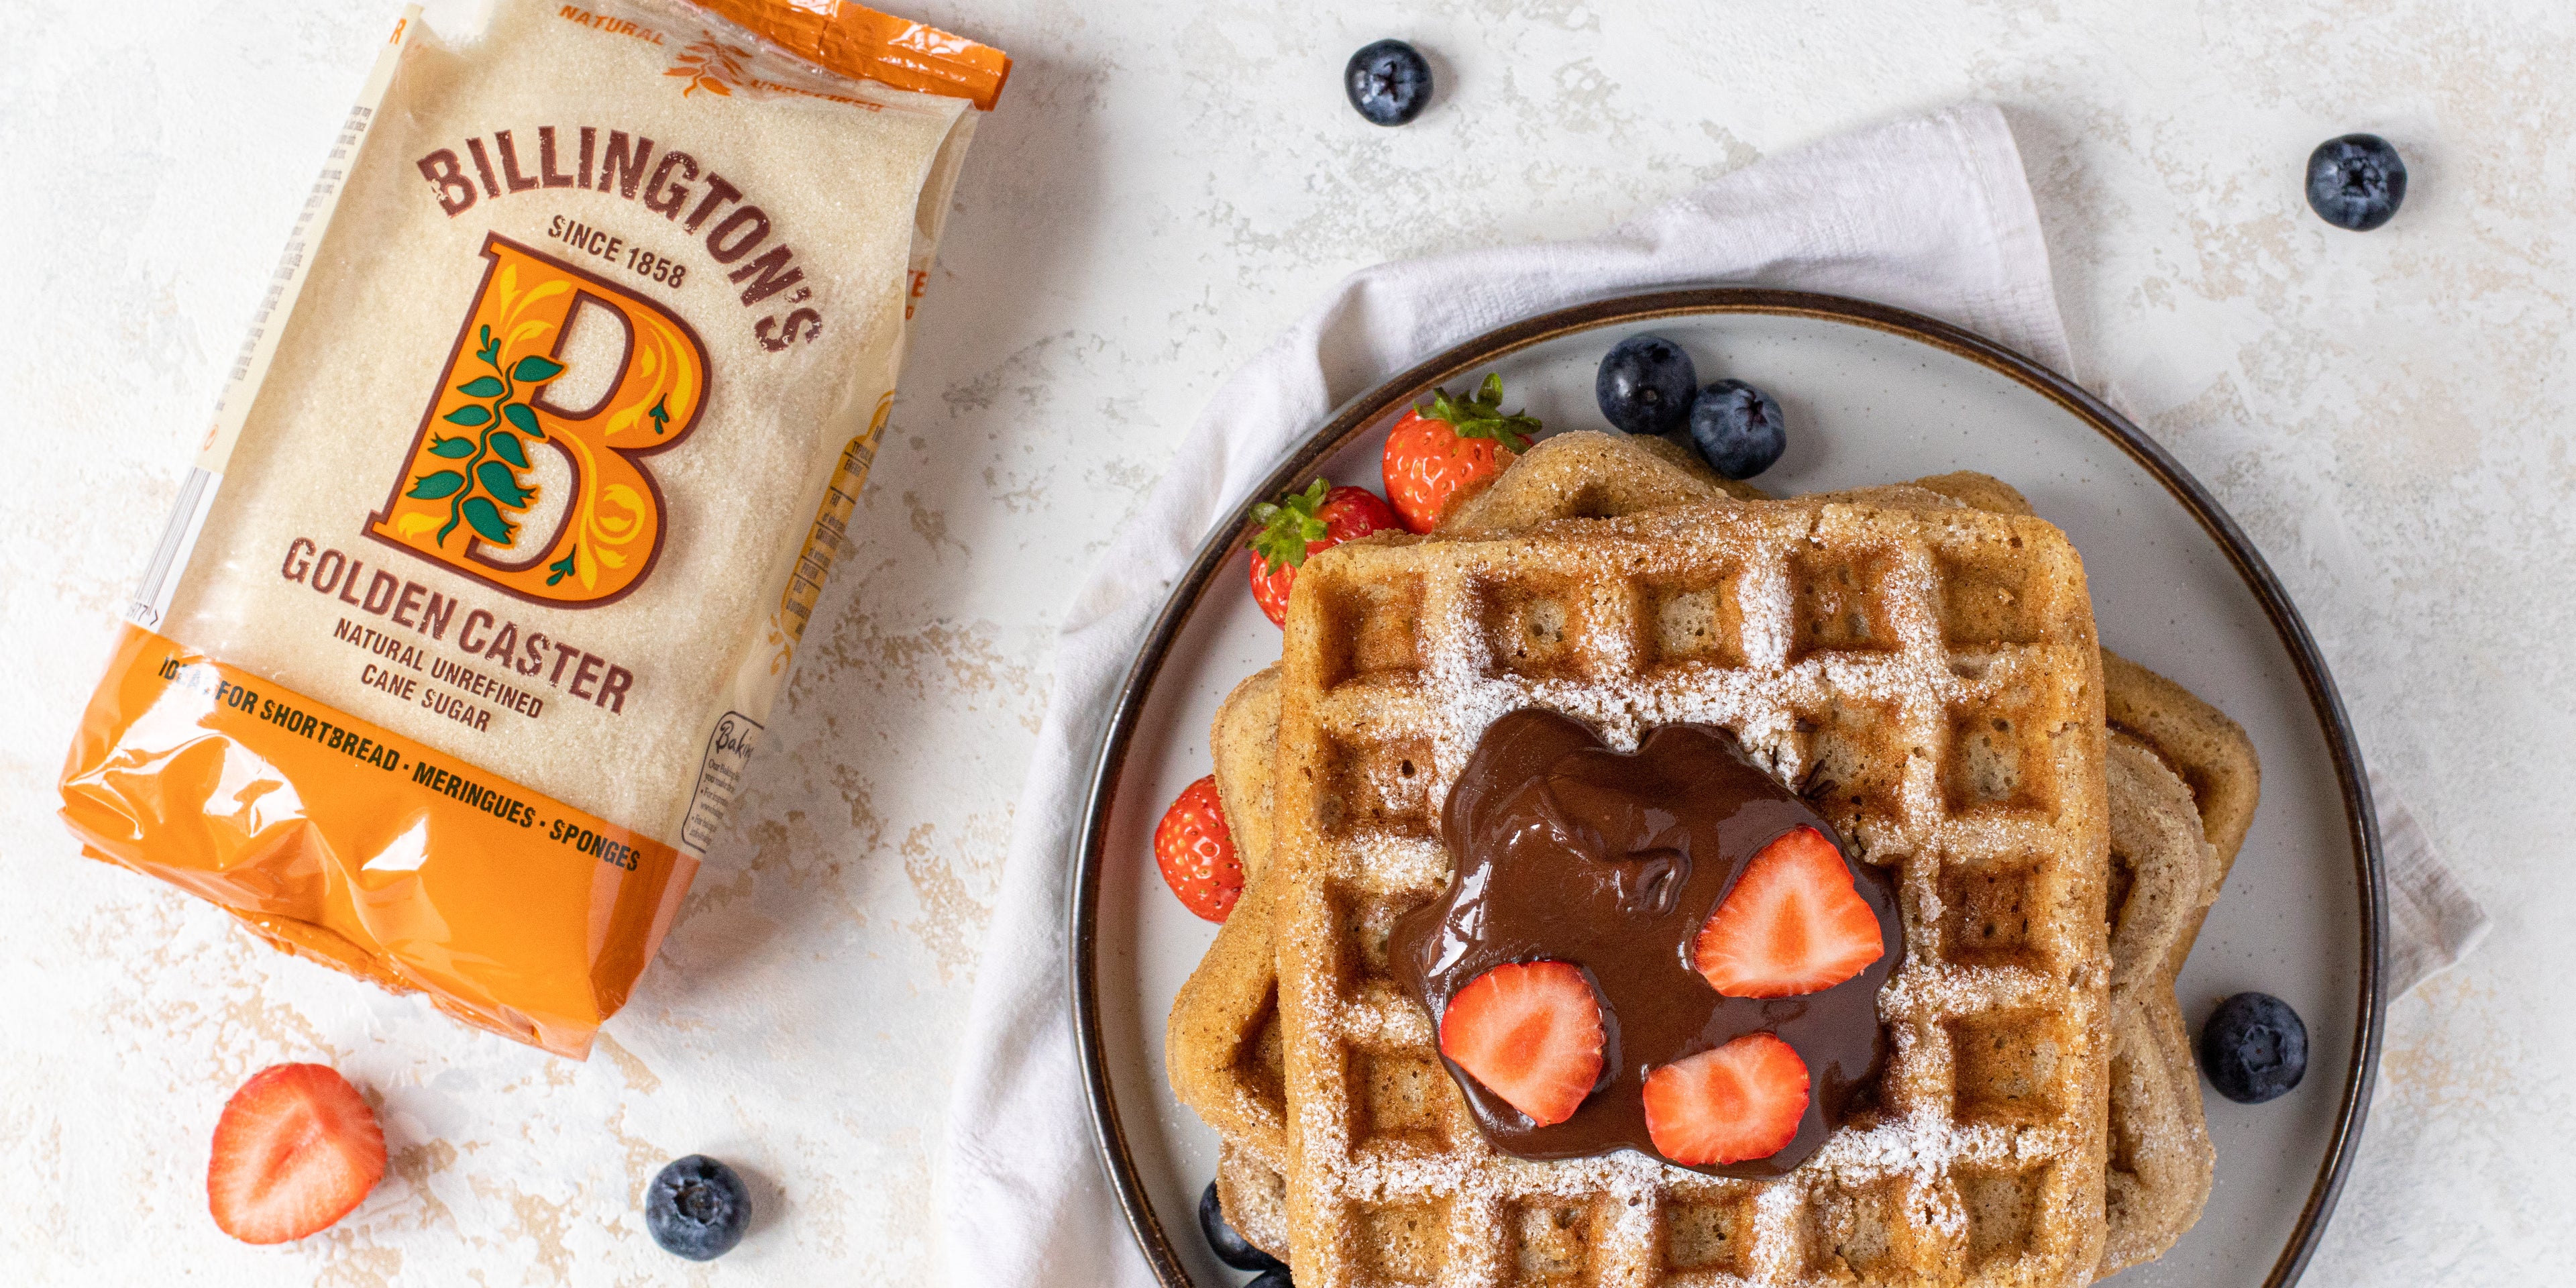 Stack of Waffles topped with chocolate and strawberries, next to a bag of Billington's Golden Caster sugar